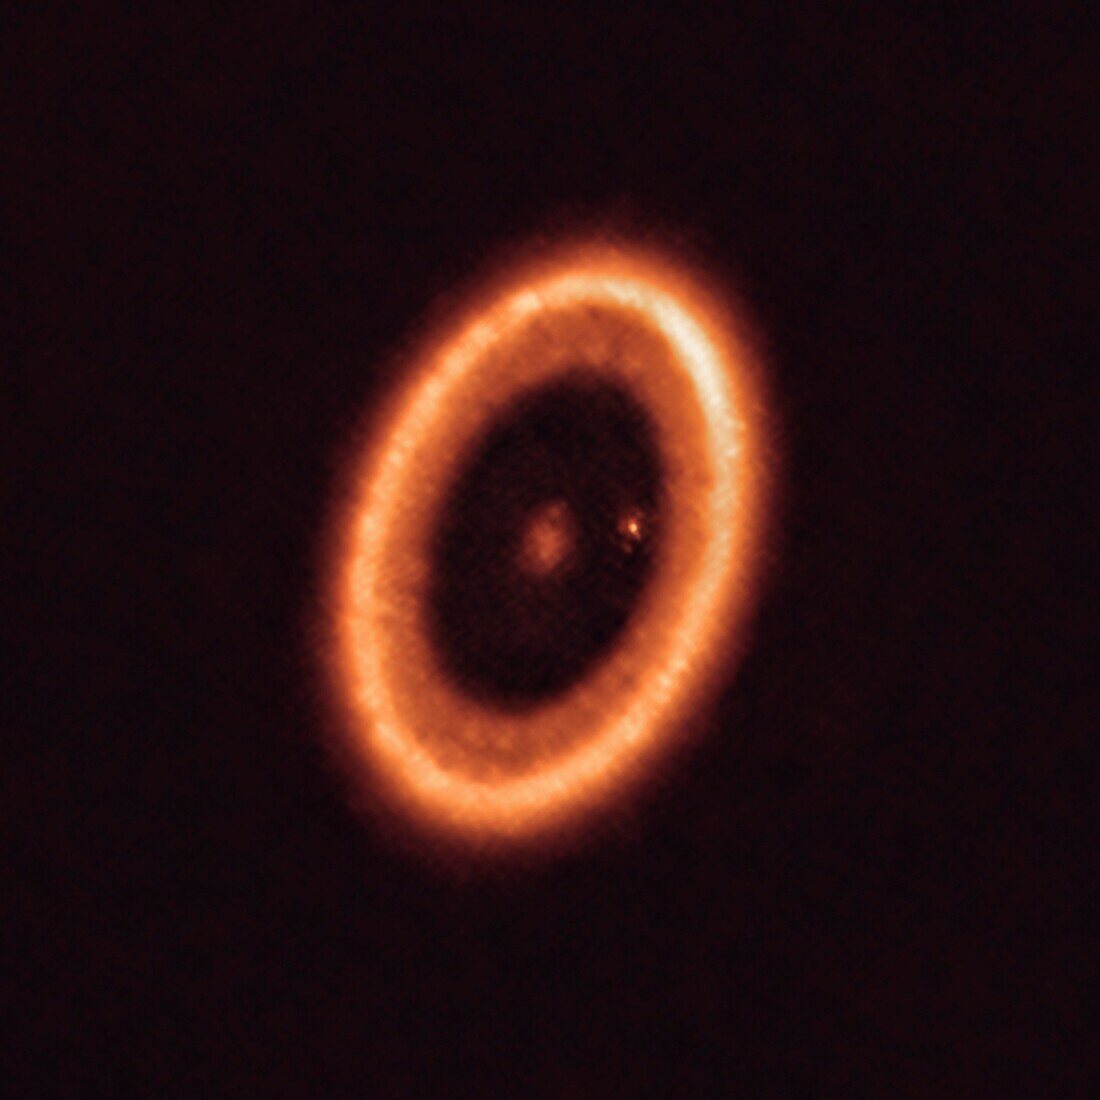 PDS 70 system, ALMA image